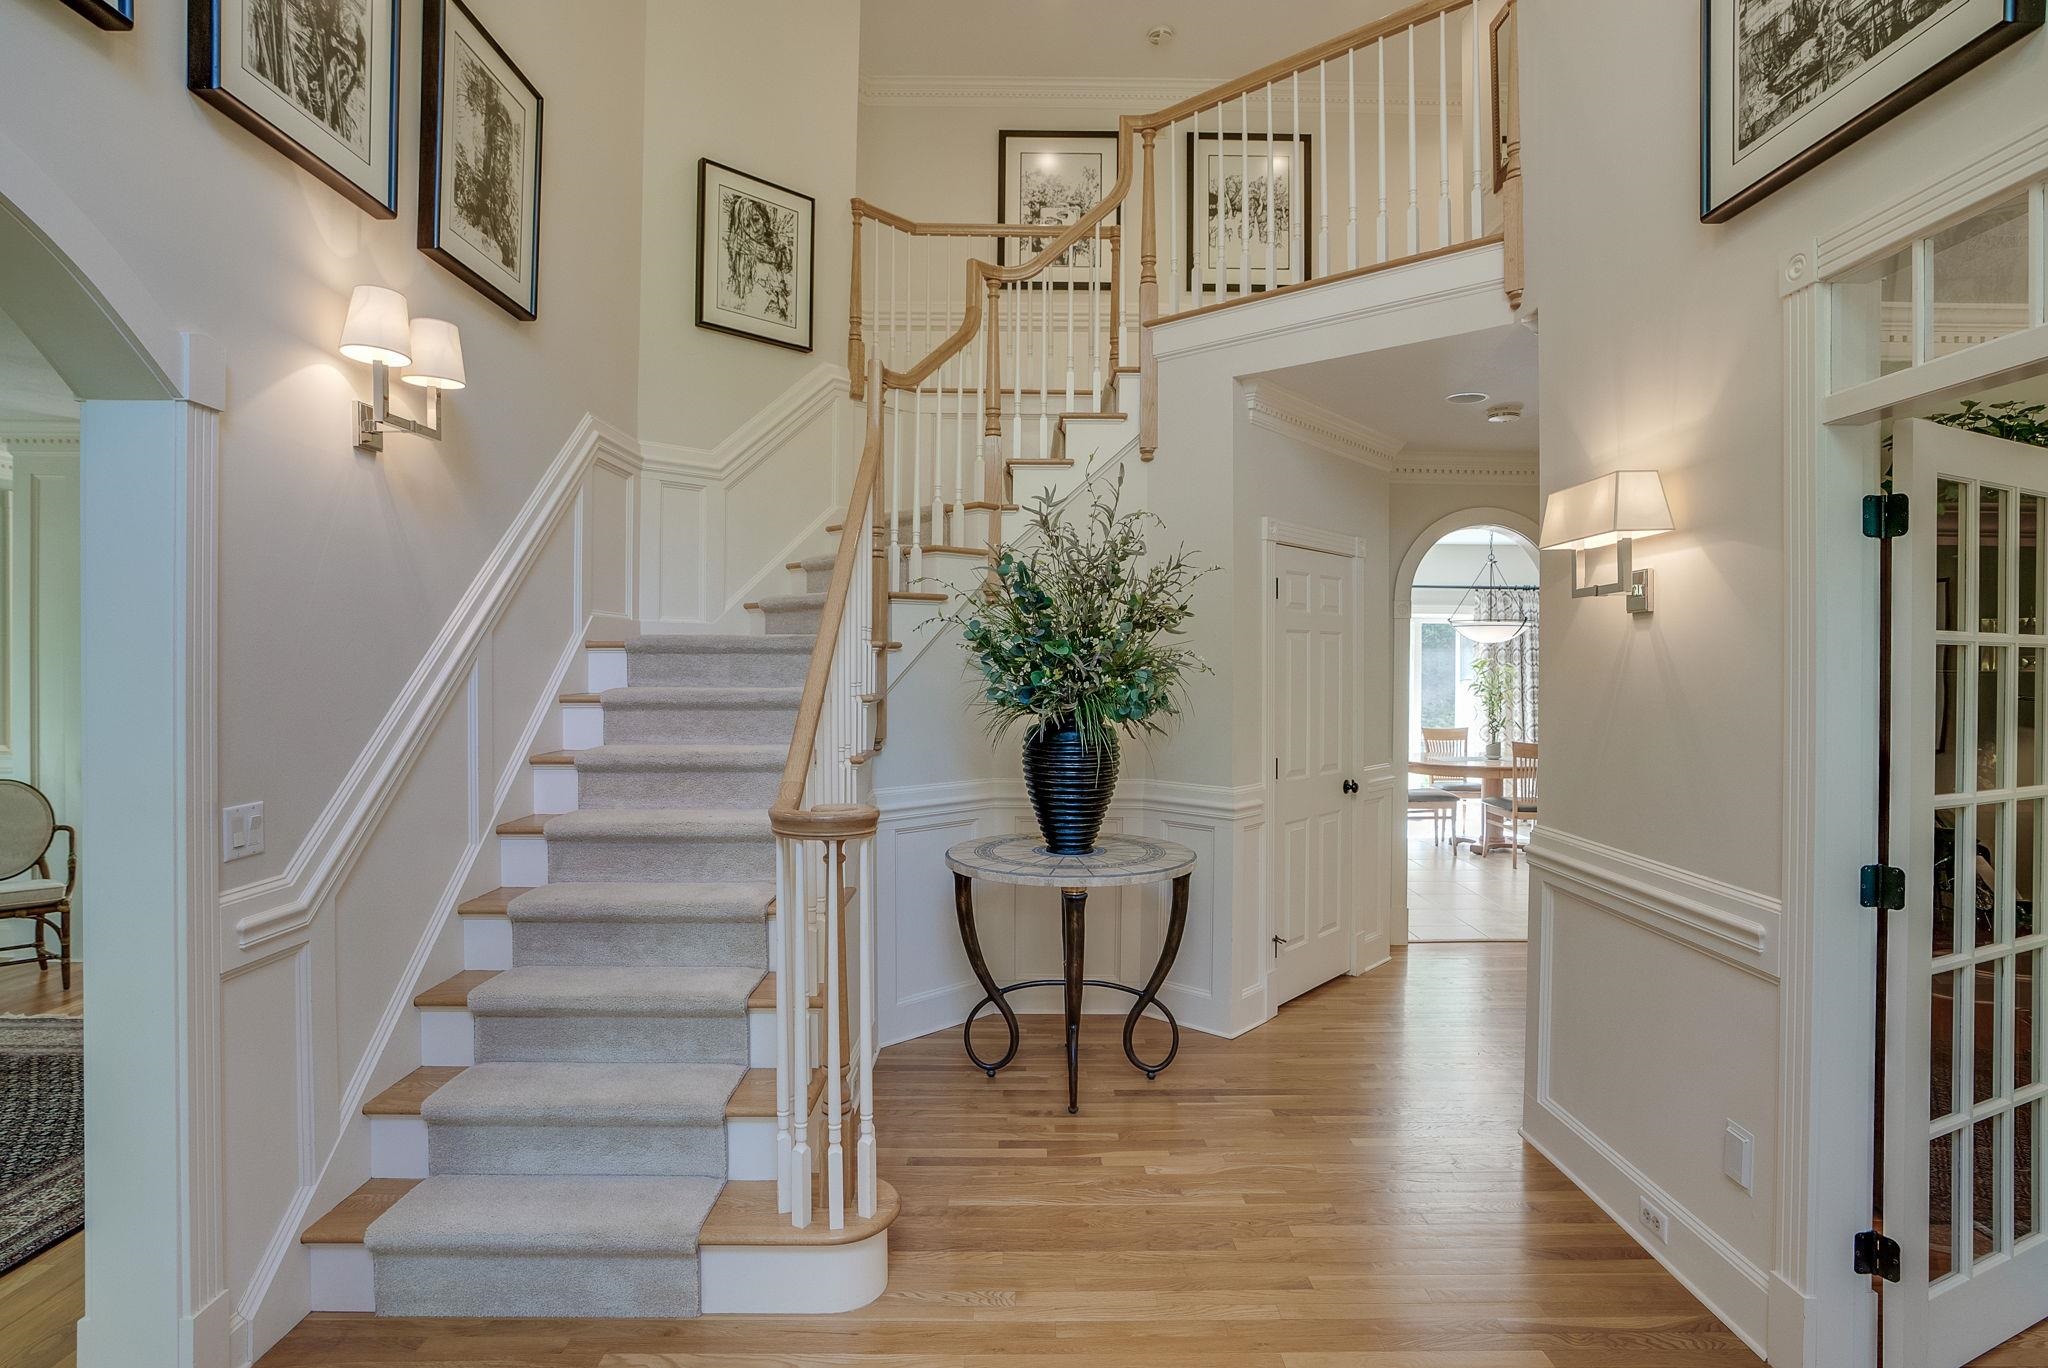 2-Story Foyer with Winding Staircase